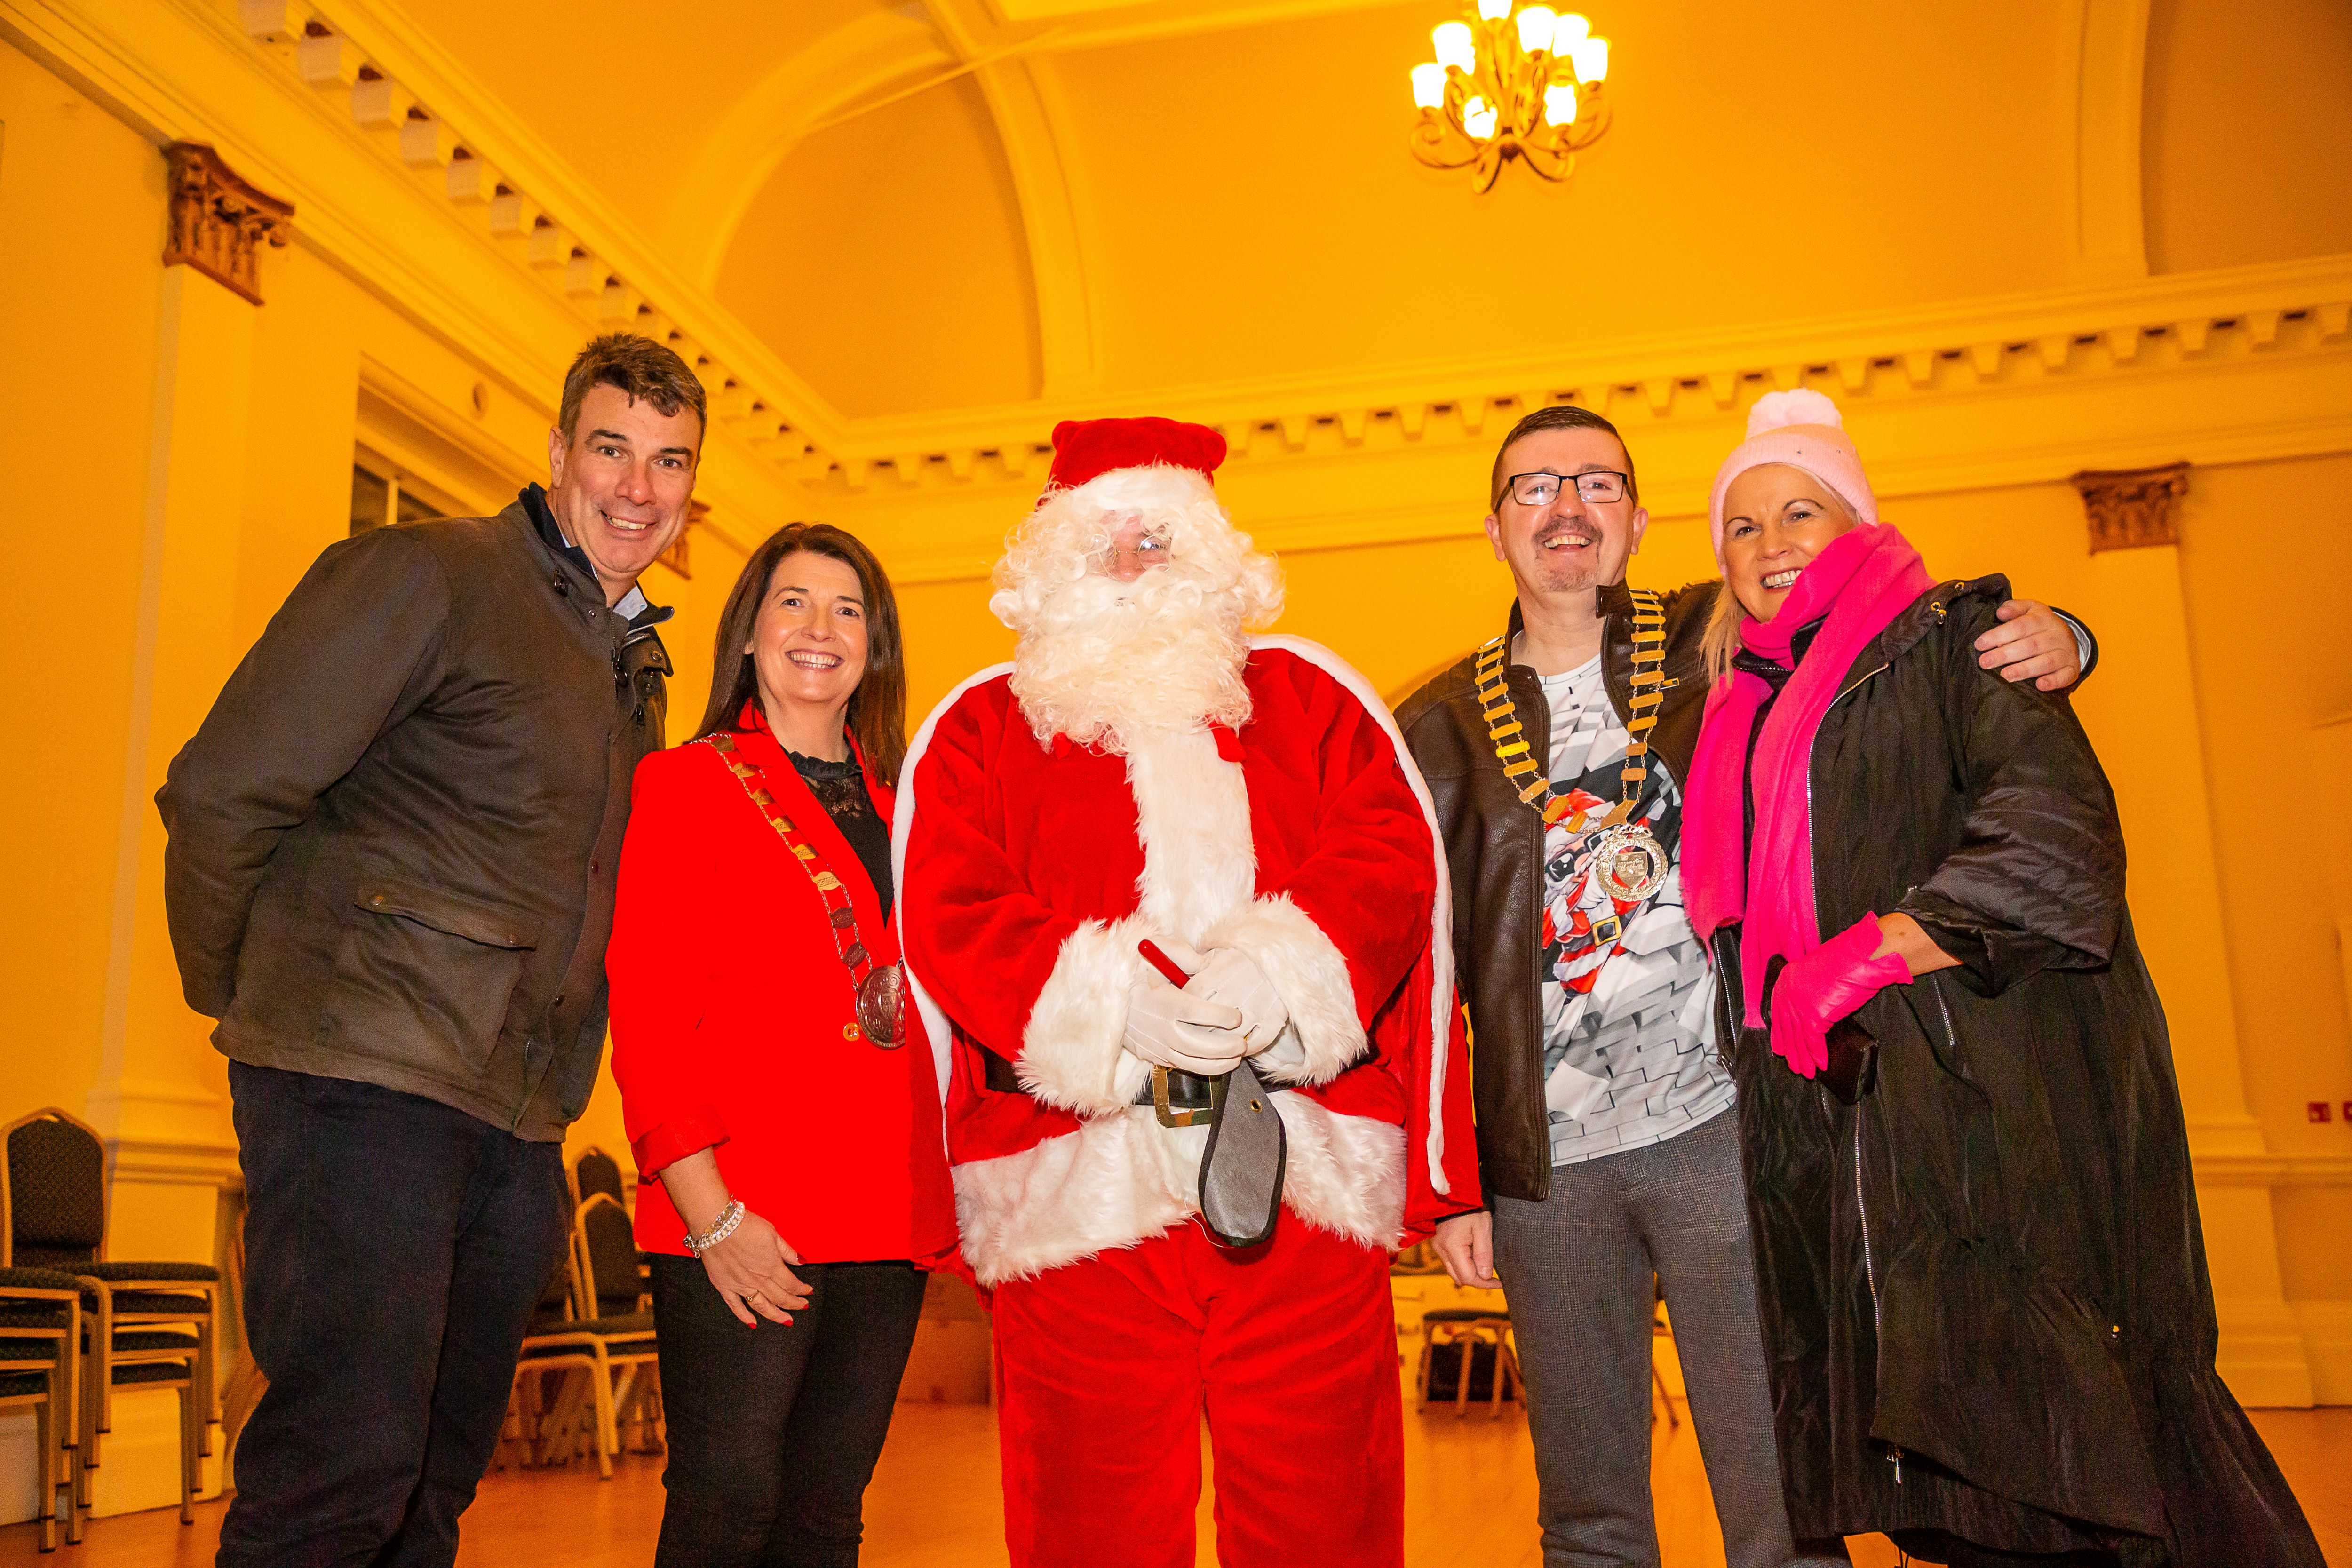 Carlow kicks off Festive Family Experience with spectacular Evening of Entertainment, Lights, and Festivities 6